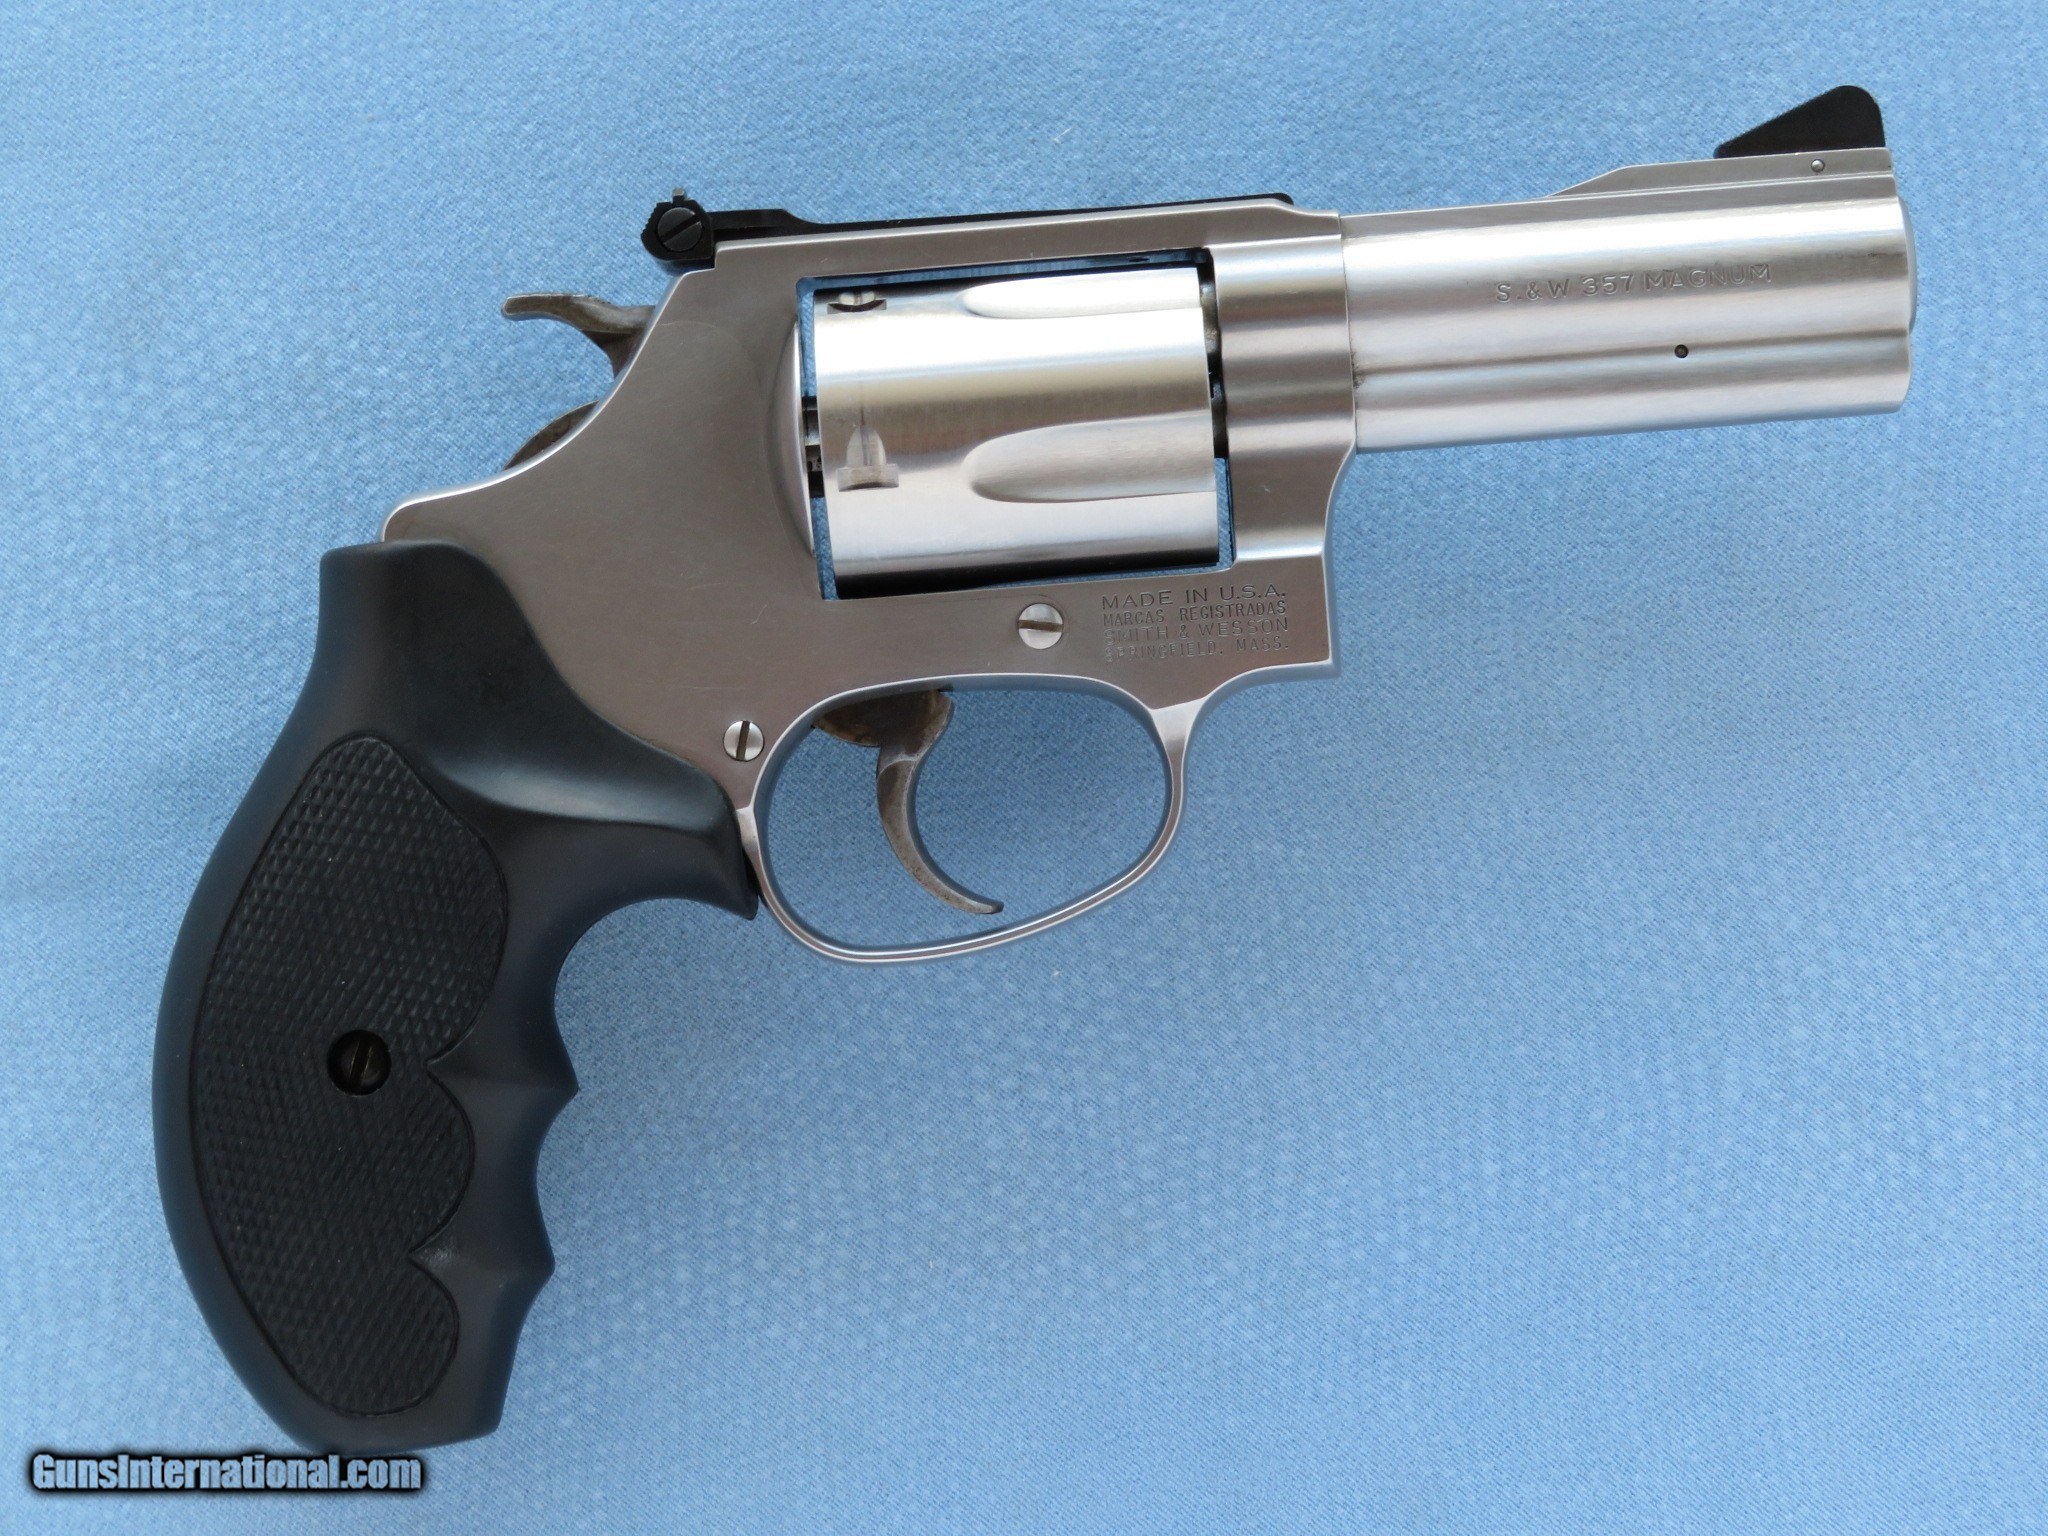 Model 60 3 Inch / Armslist For Sale Smith Wesson Model 60 3 Inch 357 Mag / Likewise the question how many millimeter in 60.3 inch has the answer of 1531.62 mm in 60.3 in.